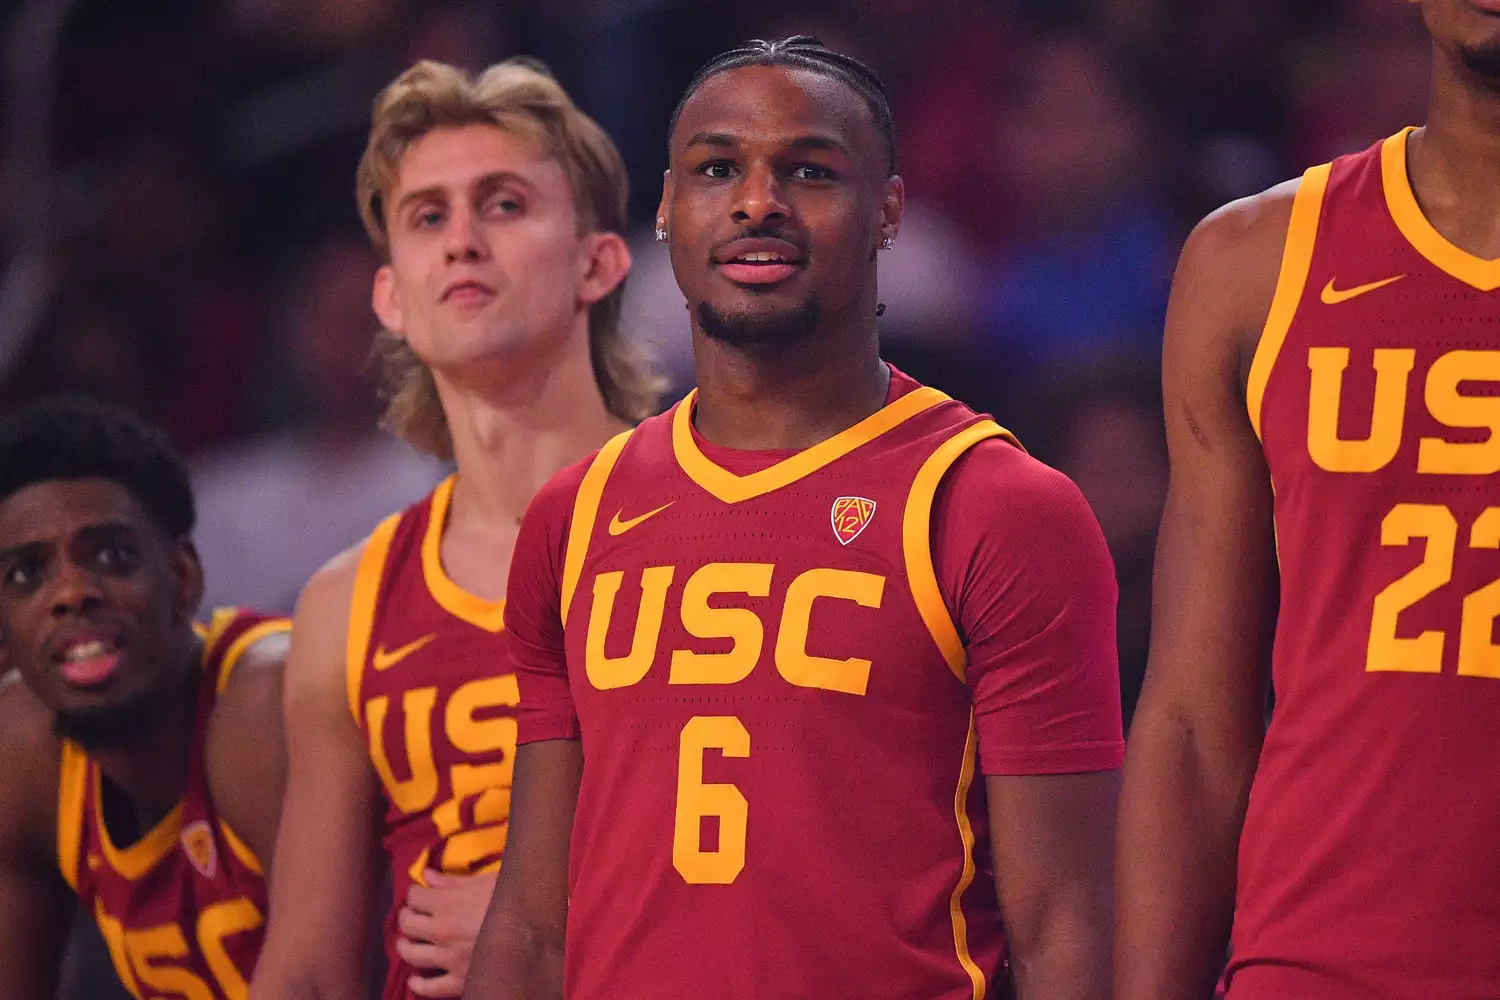 USC Trojans guard Bronny James (6) looks on during Trojan HoopLA, a college basketball kickoff event featuring the USC Trojans, on October 19, 2023